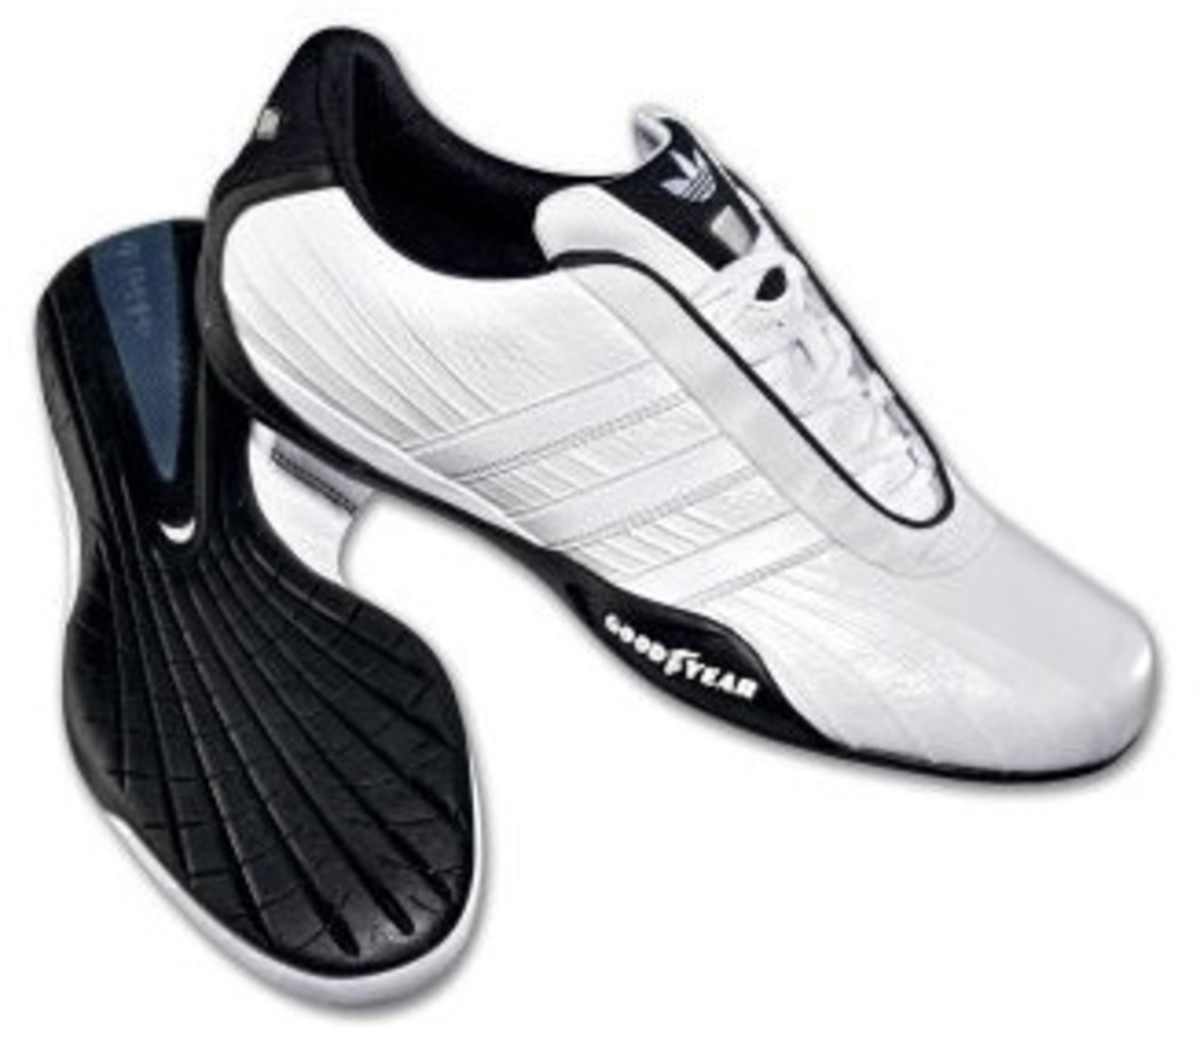 Adidas Goodyear Race Leather Seat - Acquire